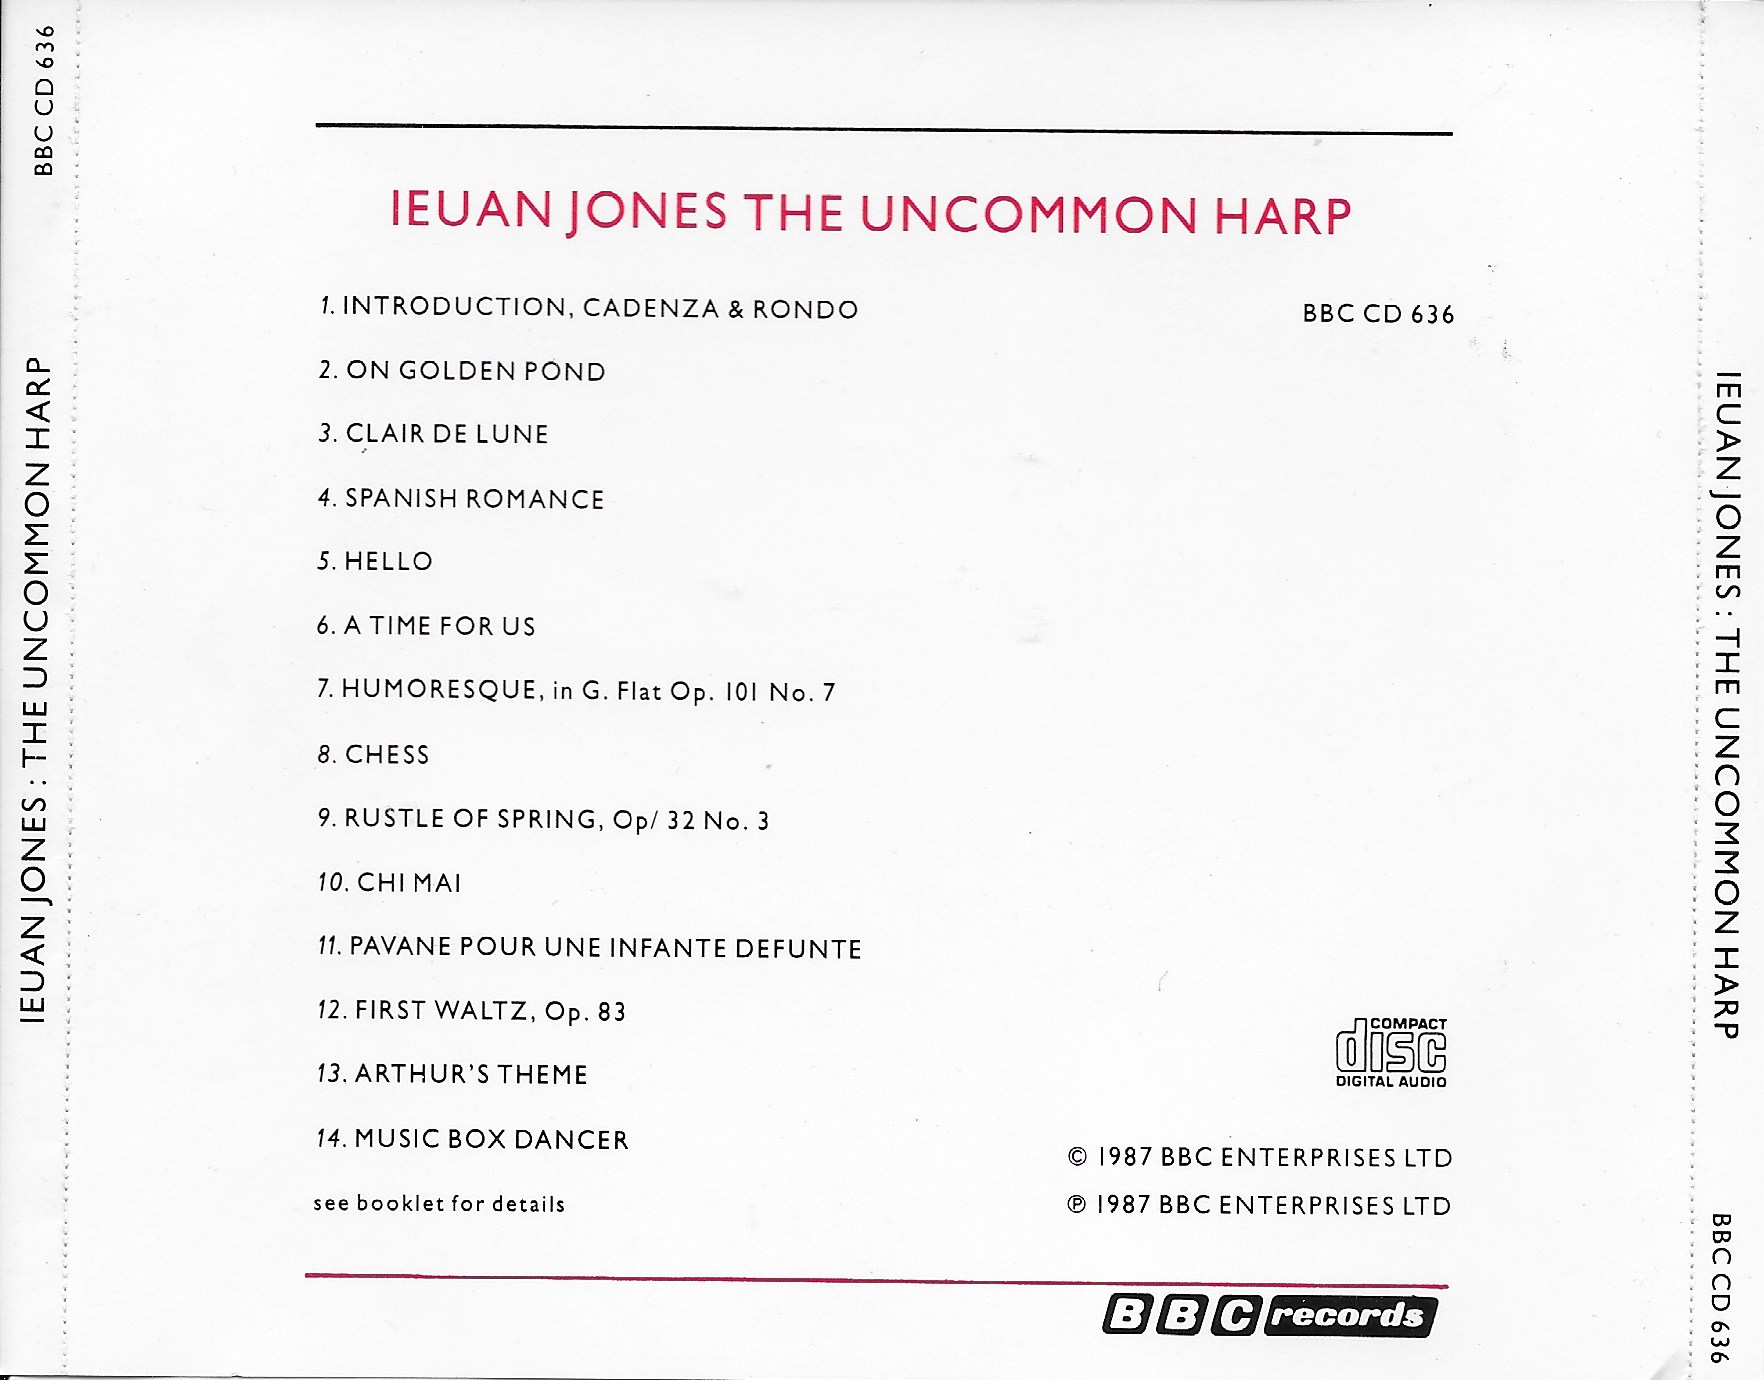 Picture of BBCCD636 The uncommon harp by artist Ieuan Jones from the BBC records and Tapes library